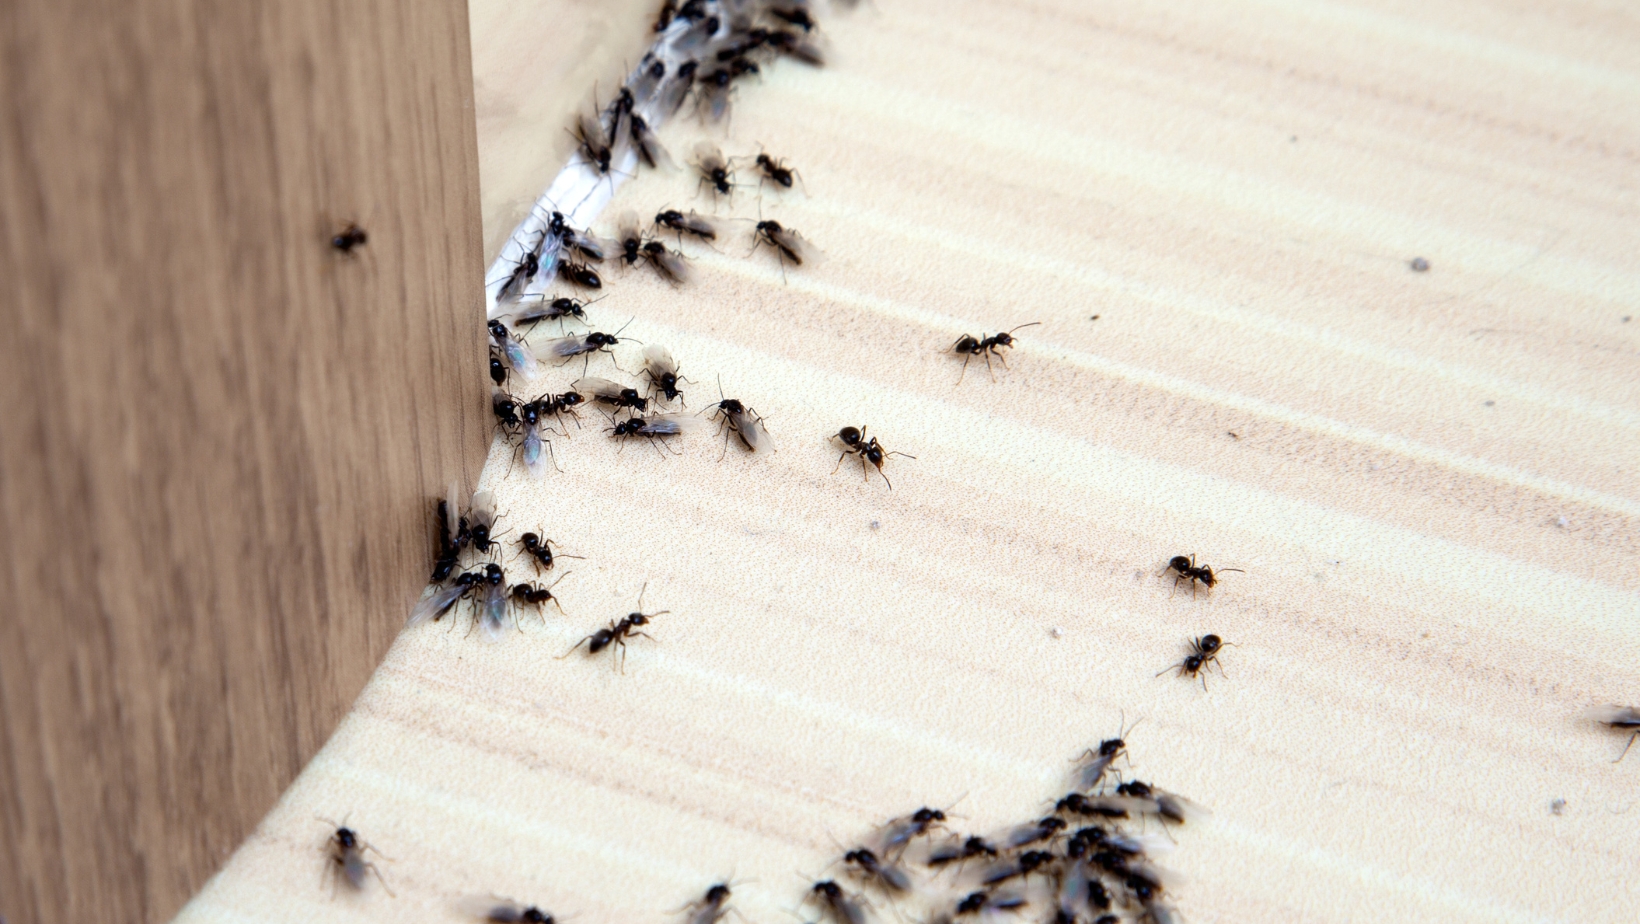 How Much Does Ant Control Cost?